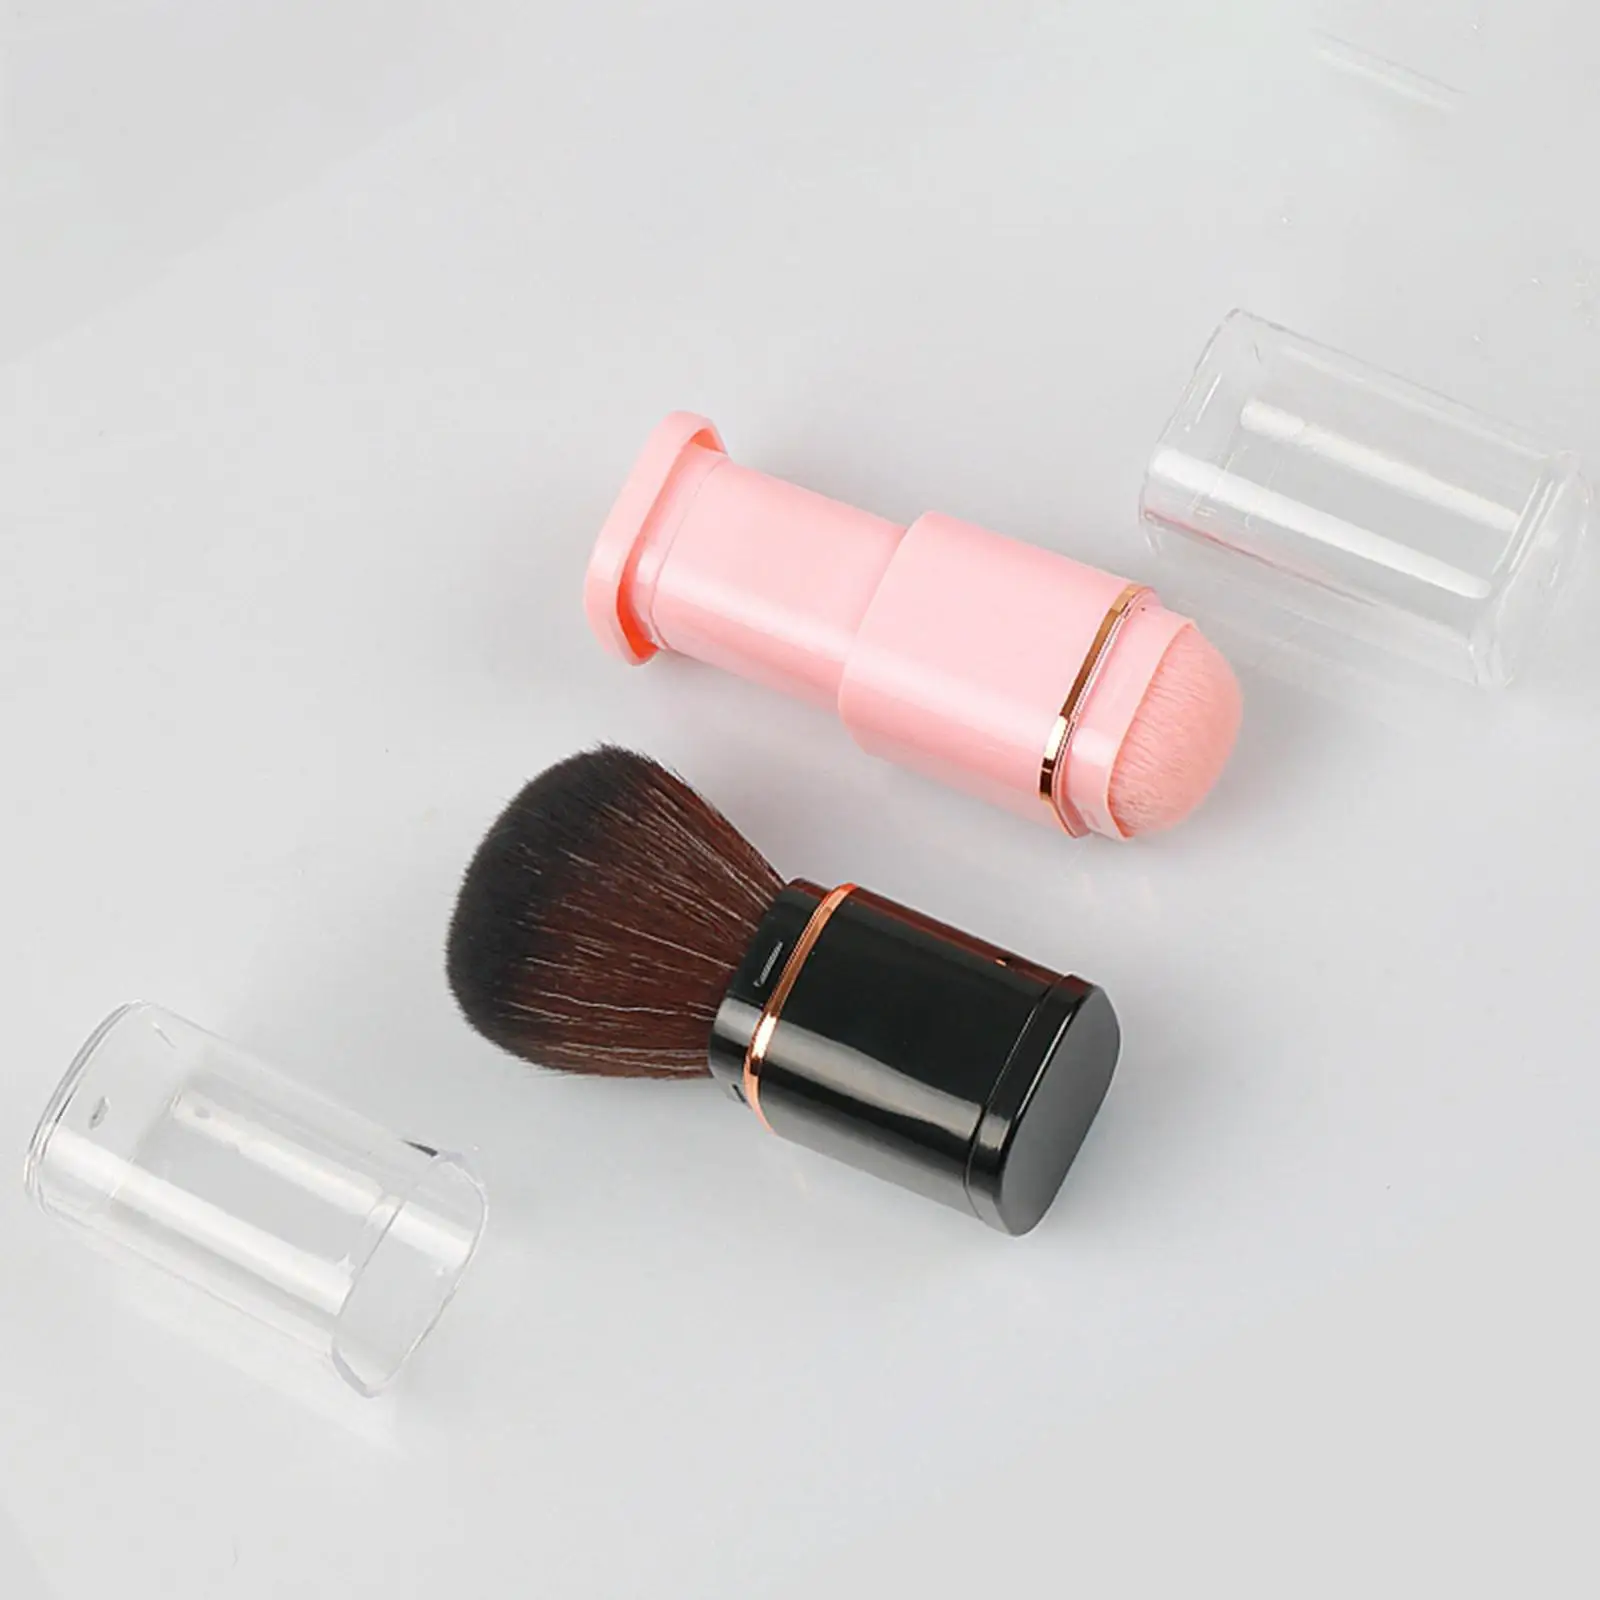 Portable Retractable Makeup Brush with Cover Small Blush Brush for Powder Bronzer Buffing Highlighter Blush